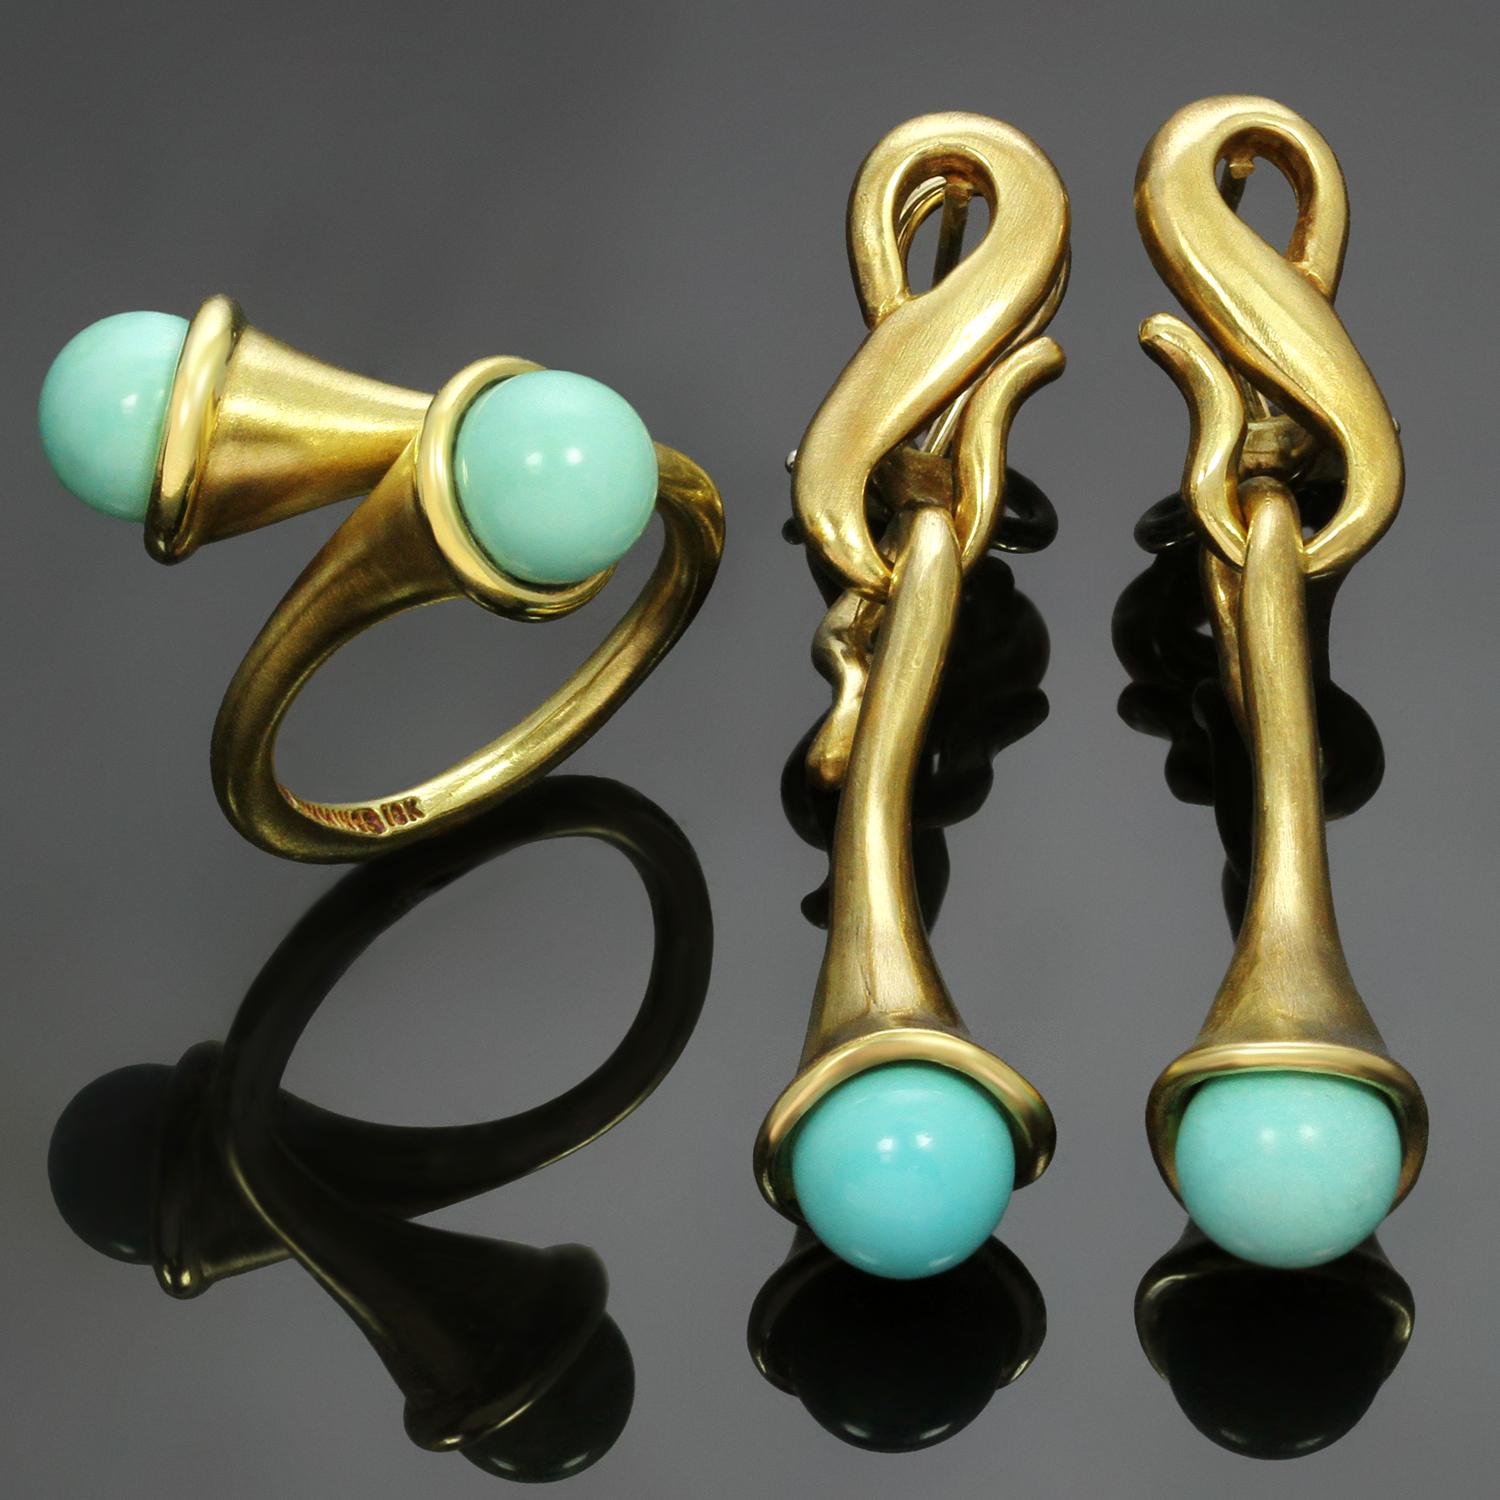 This chic Angela Cummings jewelry set is composed of earrings and a ring crafted in brushed 18k yellow gold and set with 7.0mm - 8.0mm natural turquoise beads. Made in United States circa 1980s. Measurements: 0.38